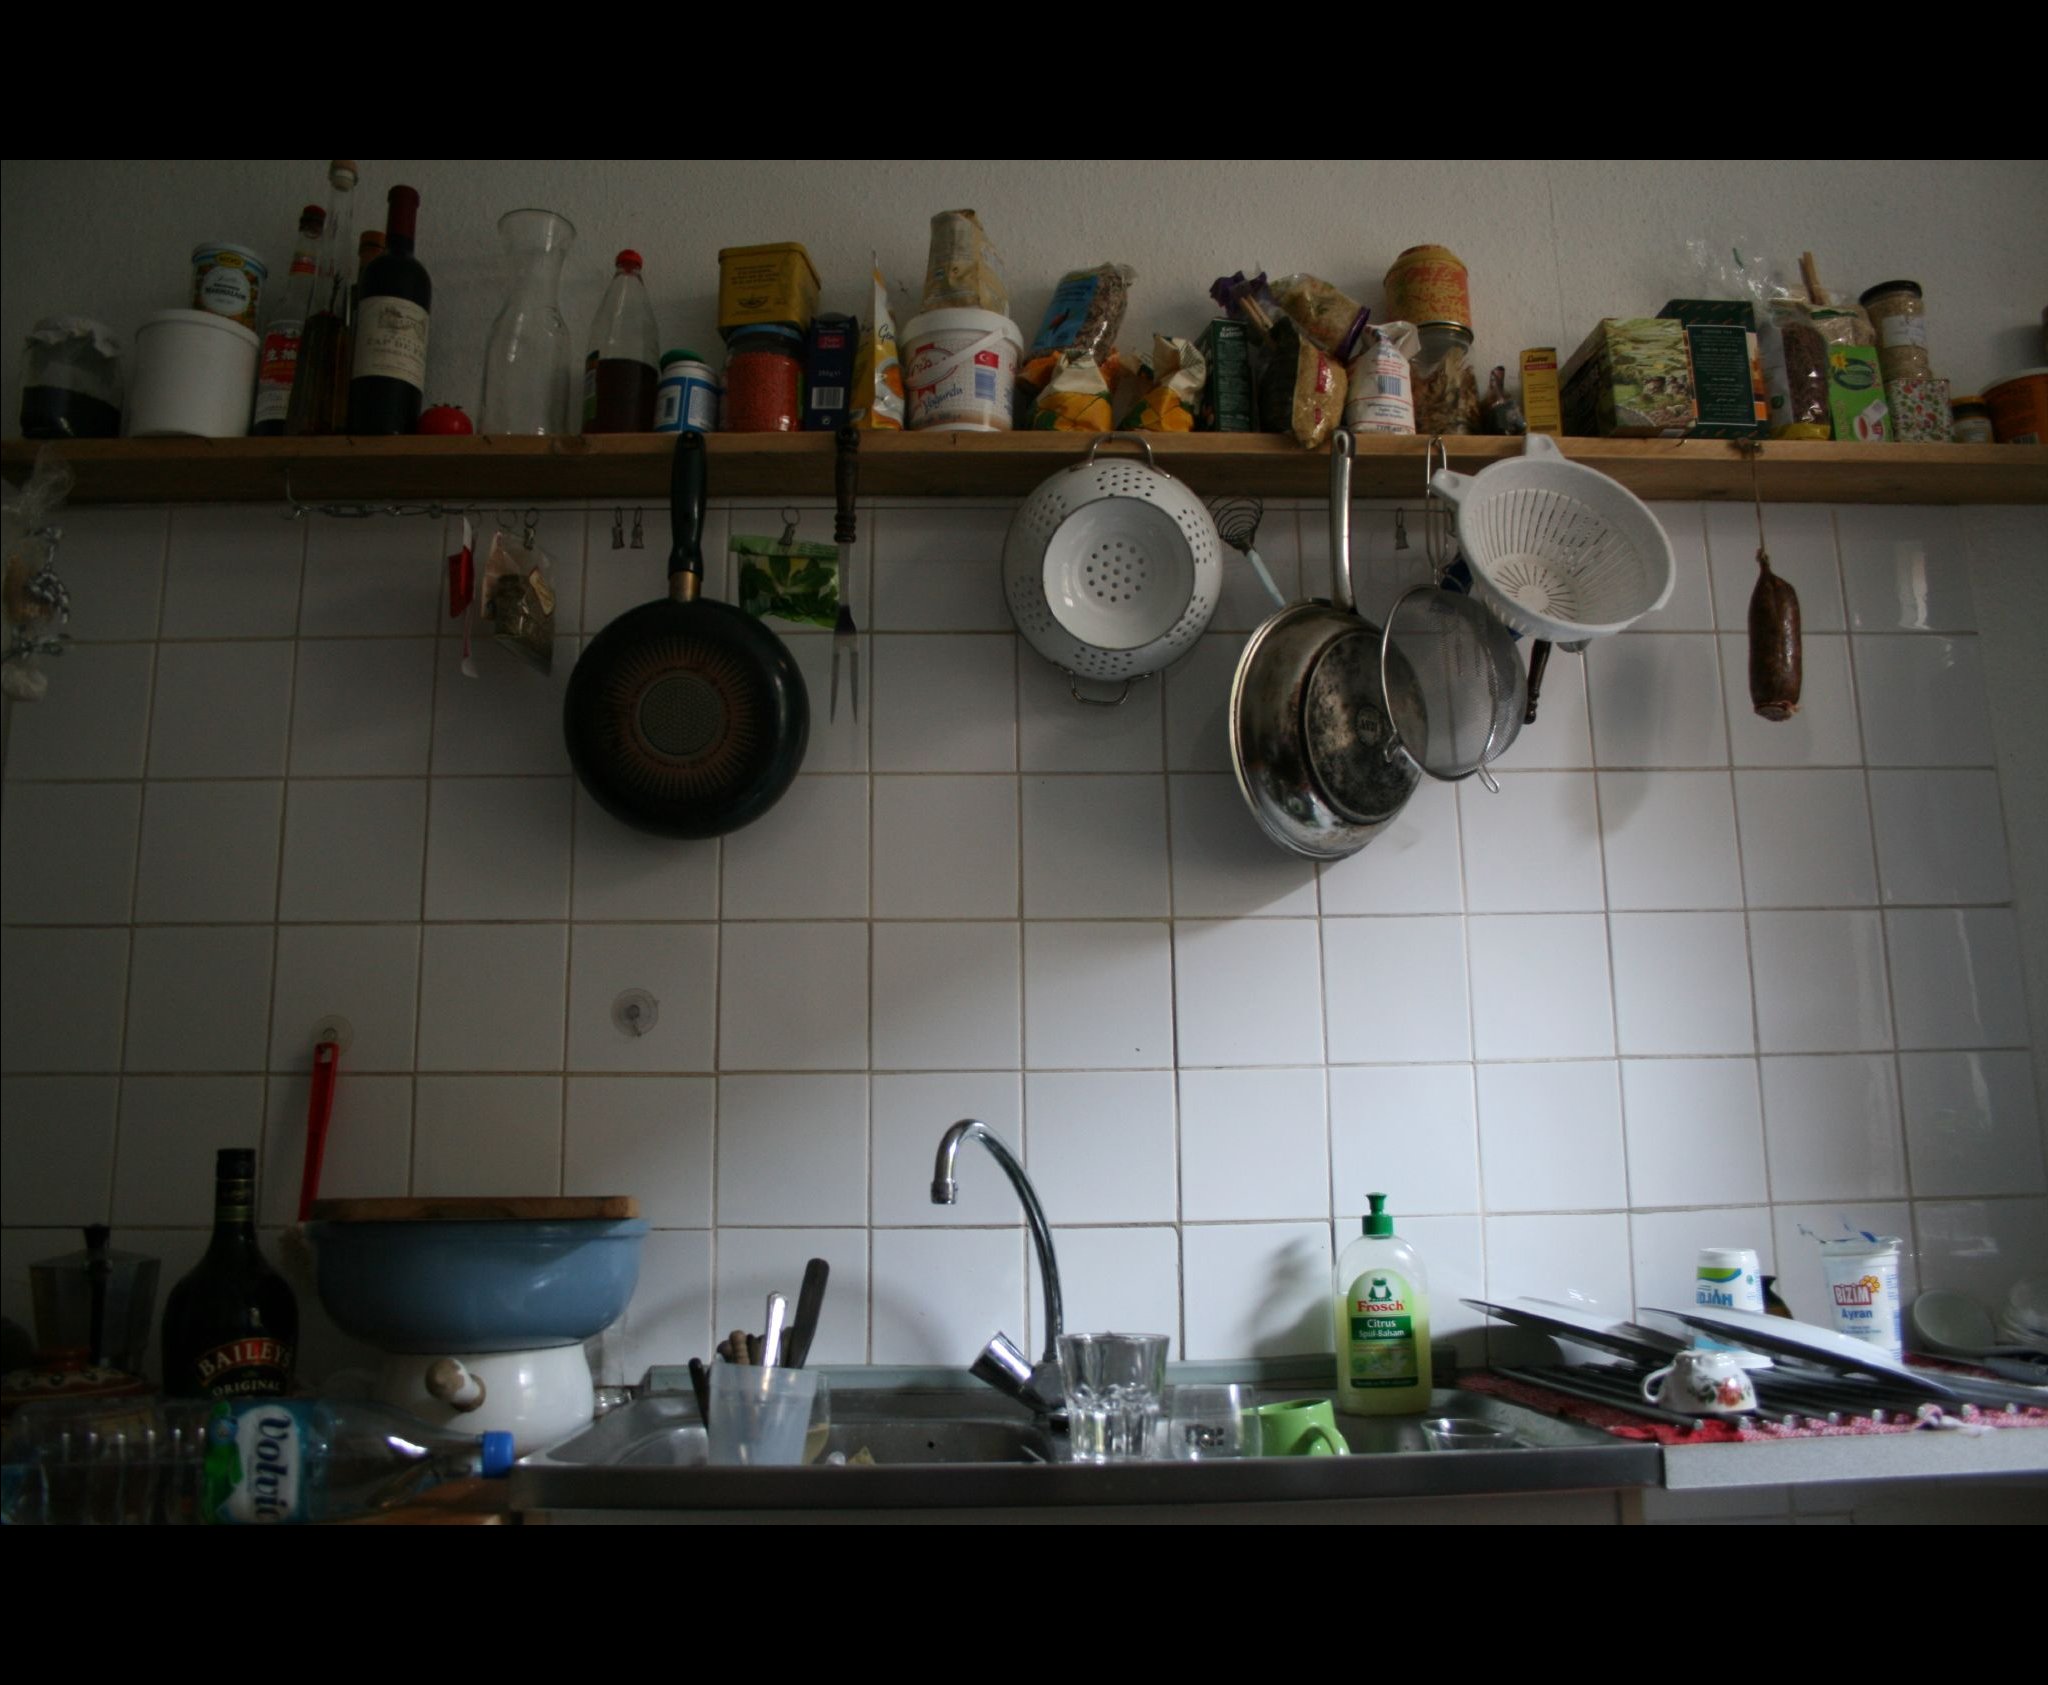 pots and pans hanging on a wall in a kitchen